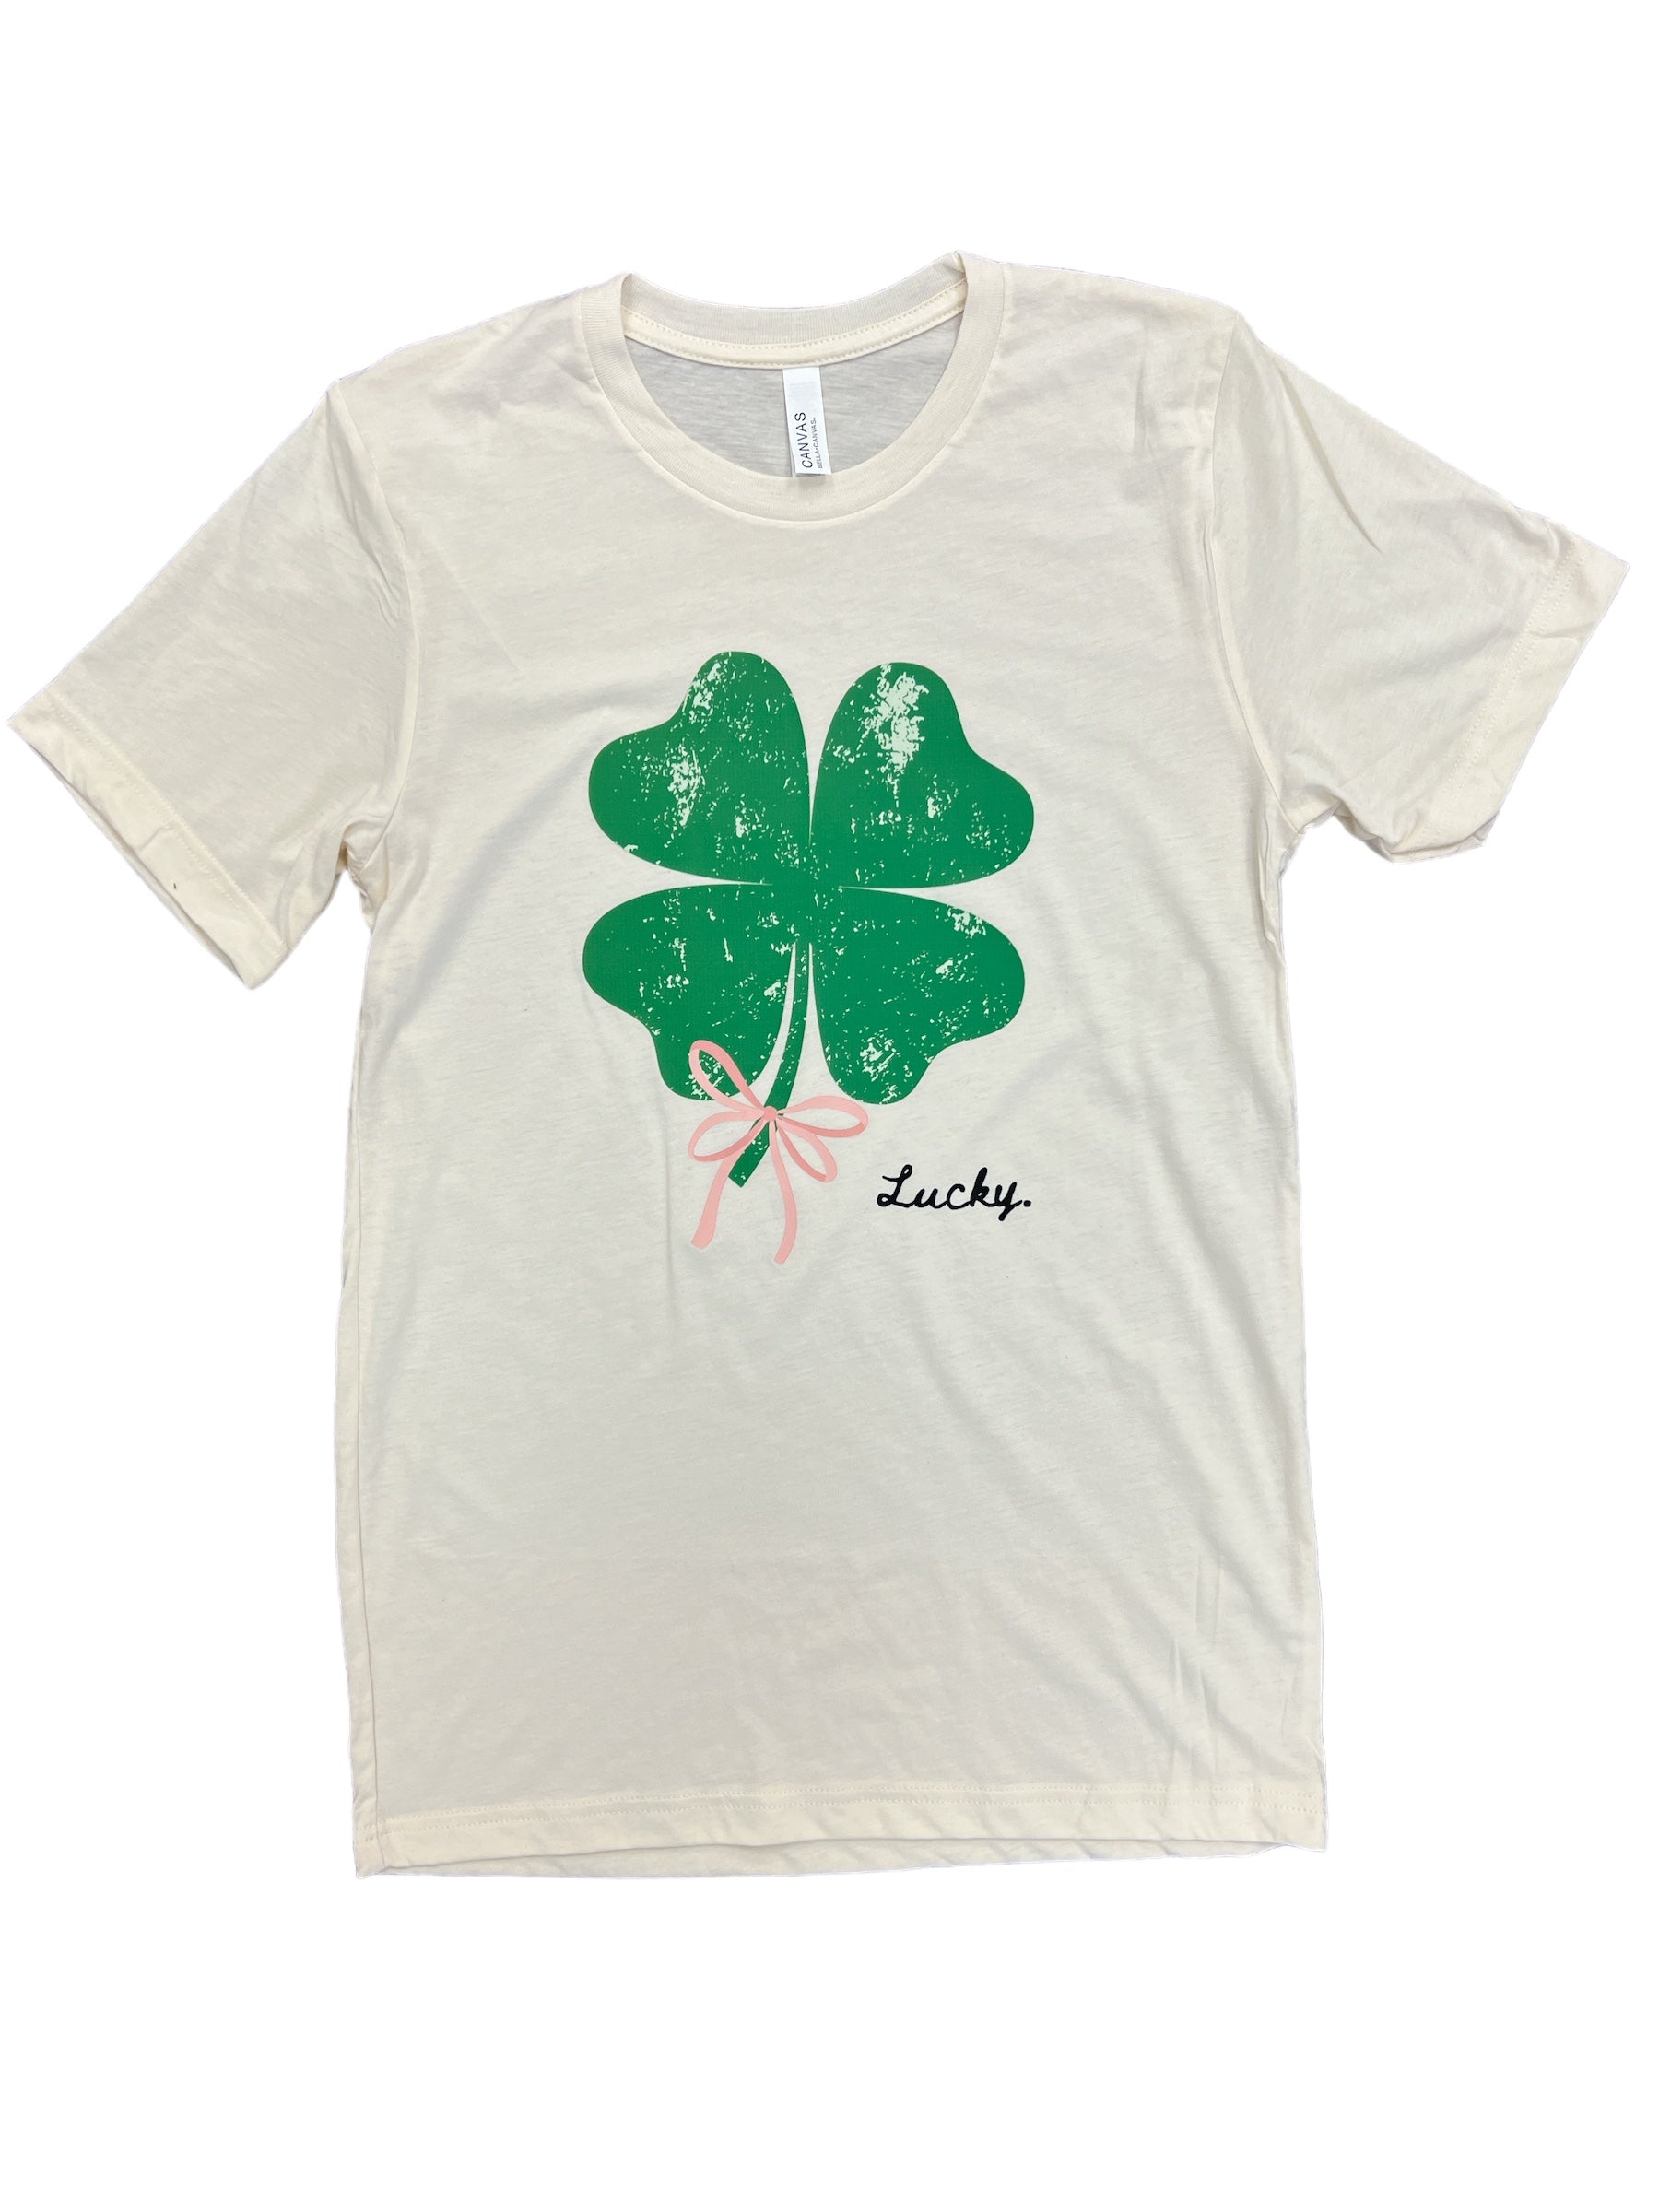 Lucky Bow Tee-110 Graphic Tee-Simply Stylish Boutique-Simply Stylish Boutique | Women’s & Kid’s Fashion | Paducah, KY